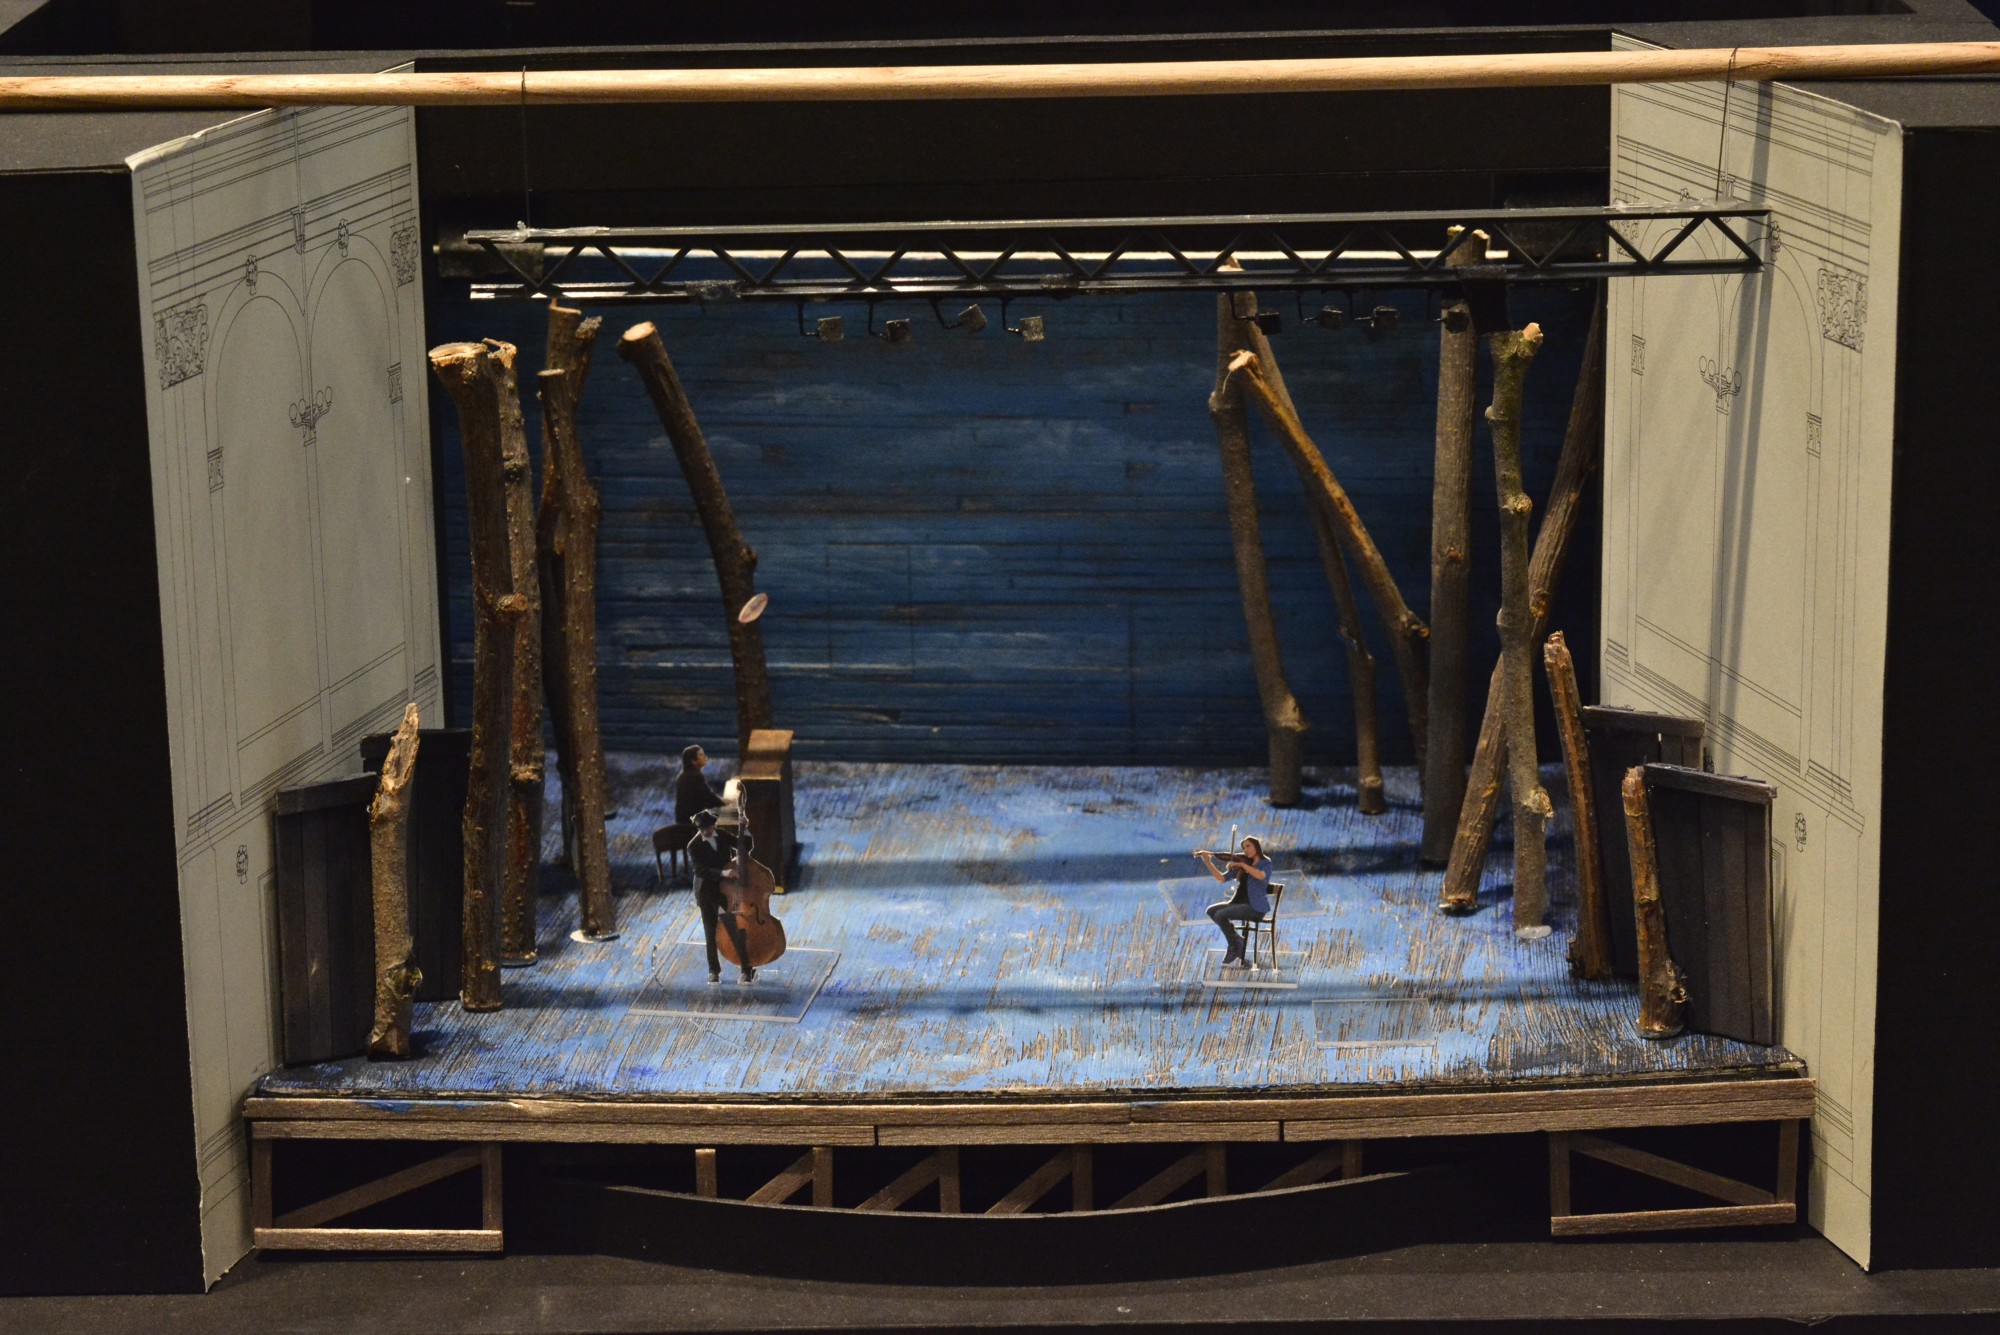 A model of a stage with cardboard people representing actors.